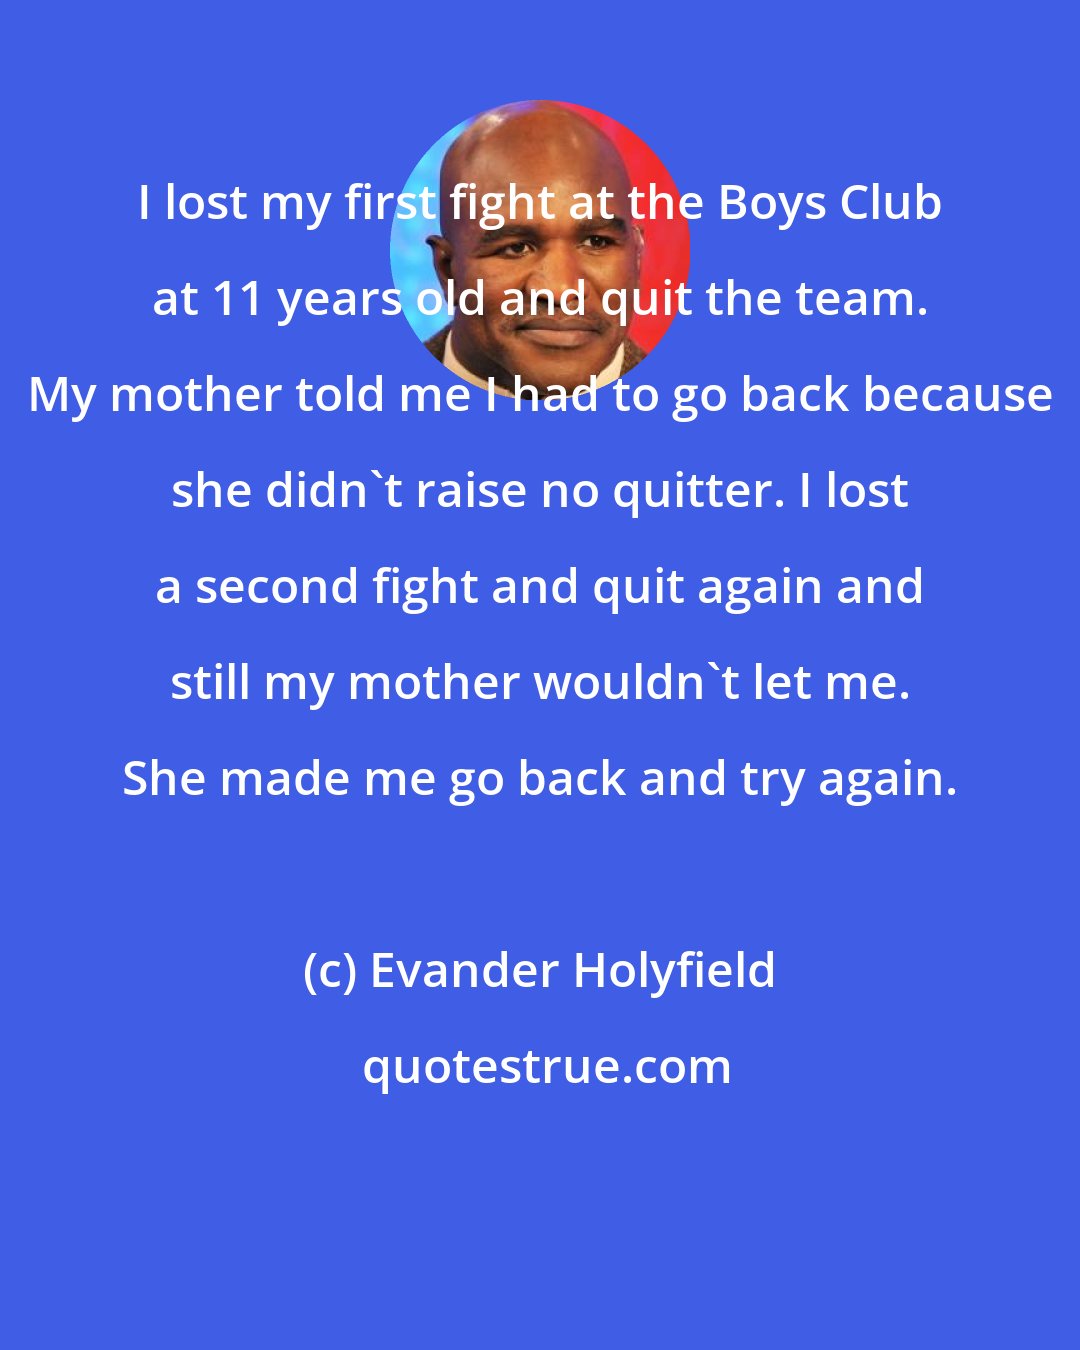 Evander Holyfield: I lost my first fight at the Boys Club at 11 years old and quit the team. My mother told me I had to go back because she didn't raise no quitter. I lost a second fight and quit again and still my mother wouldn't let me. She made me go back and try again.